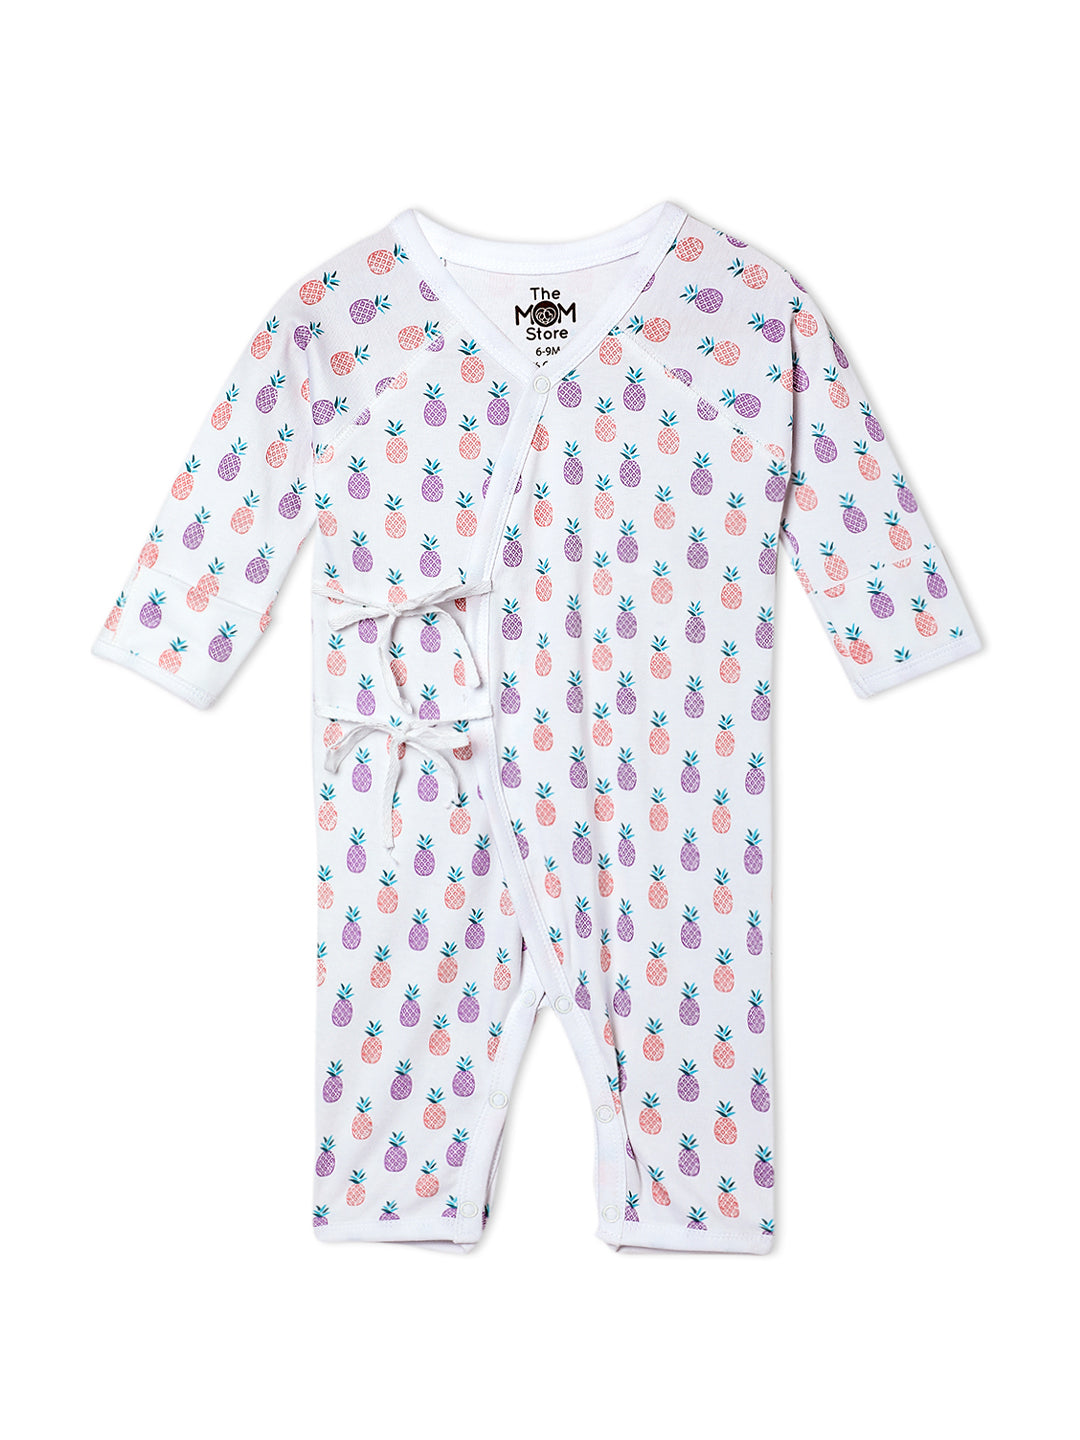 Jabla Style Infant Romper Combo Of 2: Fresh Slice For The Day-I Pine For You